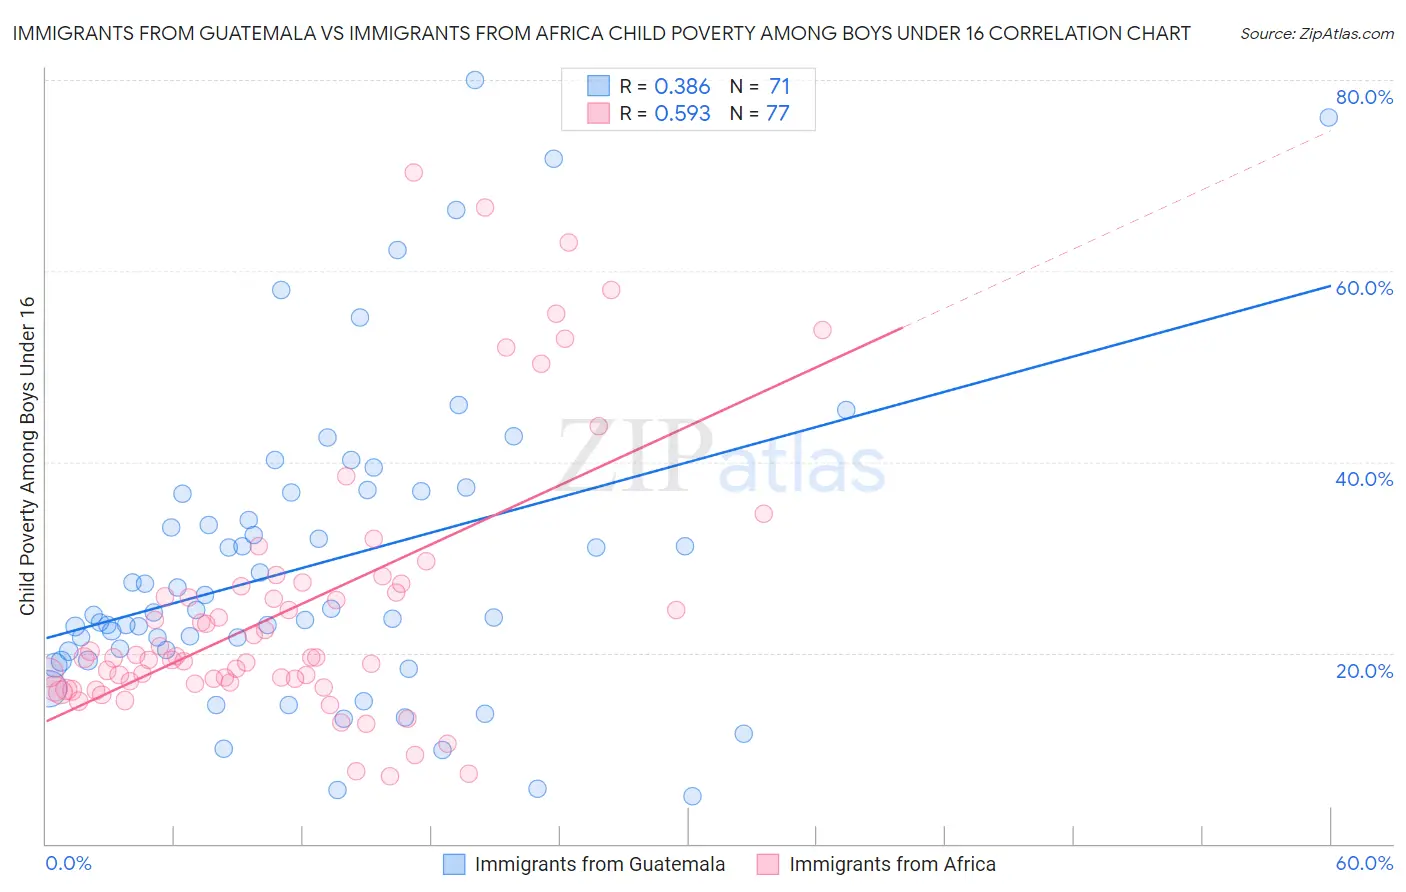 Immigrants from Guatemala vs Immigrants from Africa Child Poverty Among Boys Under 16